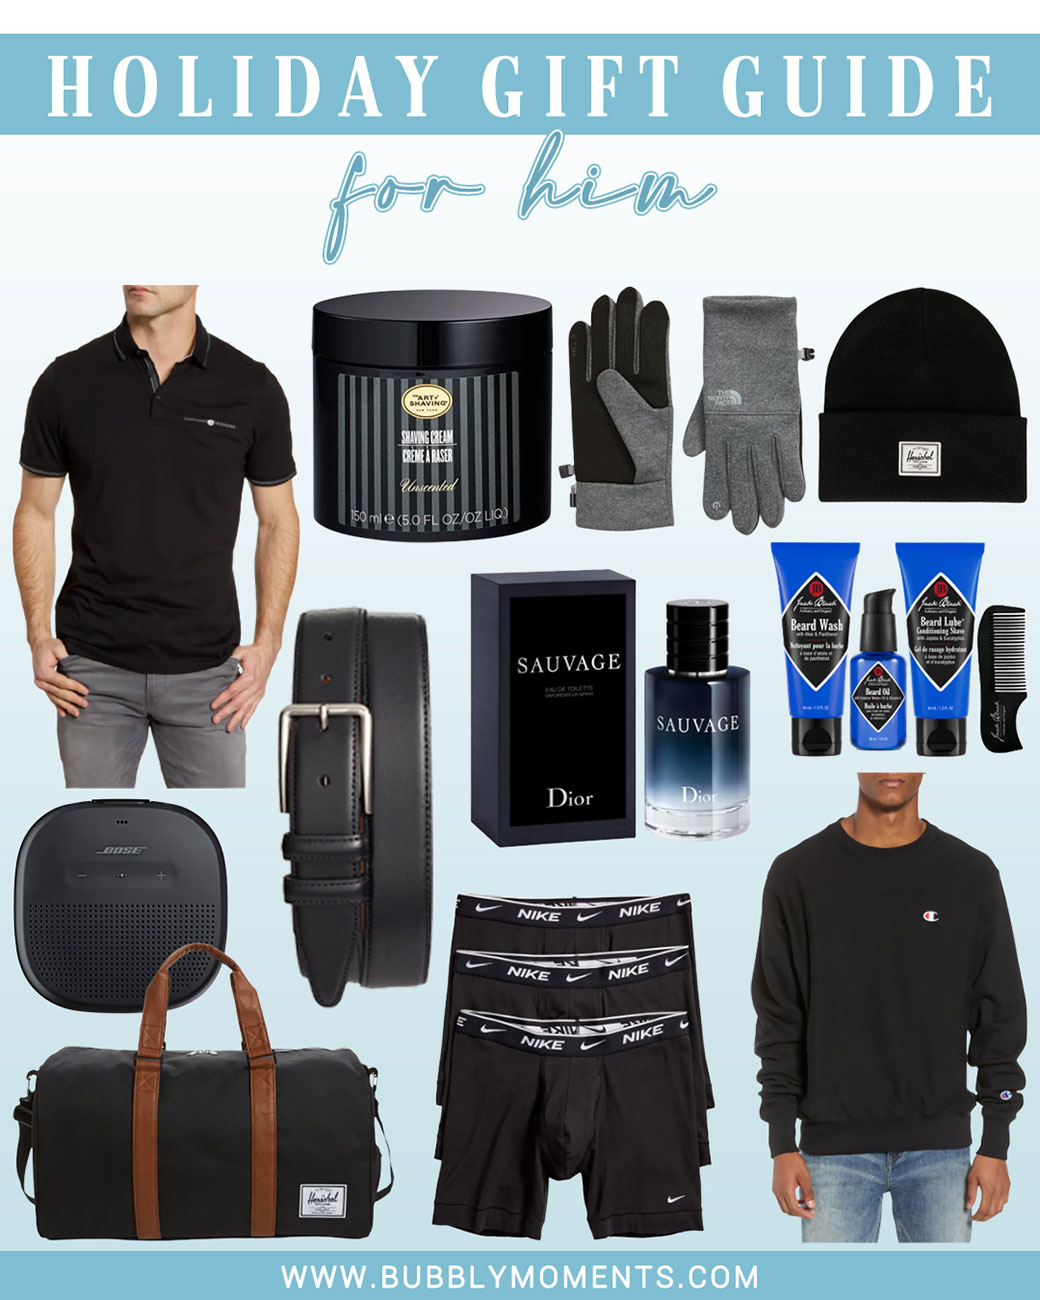 Gifts for him | Christmas gifts for men | Gifts for men | Gift ideas for men | Best gifts for men | Crew Sweatshirt | Dri-FIT Performance Boxer Briefs | Duffle Bag | Dior Sauvage Eau de Toilette | SoundLink Micro Bluetooth Speaker | Slim Fit Tipped Pocket Polo | Shaving Cream | Beard Grooming Set | Bubbly Moments